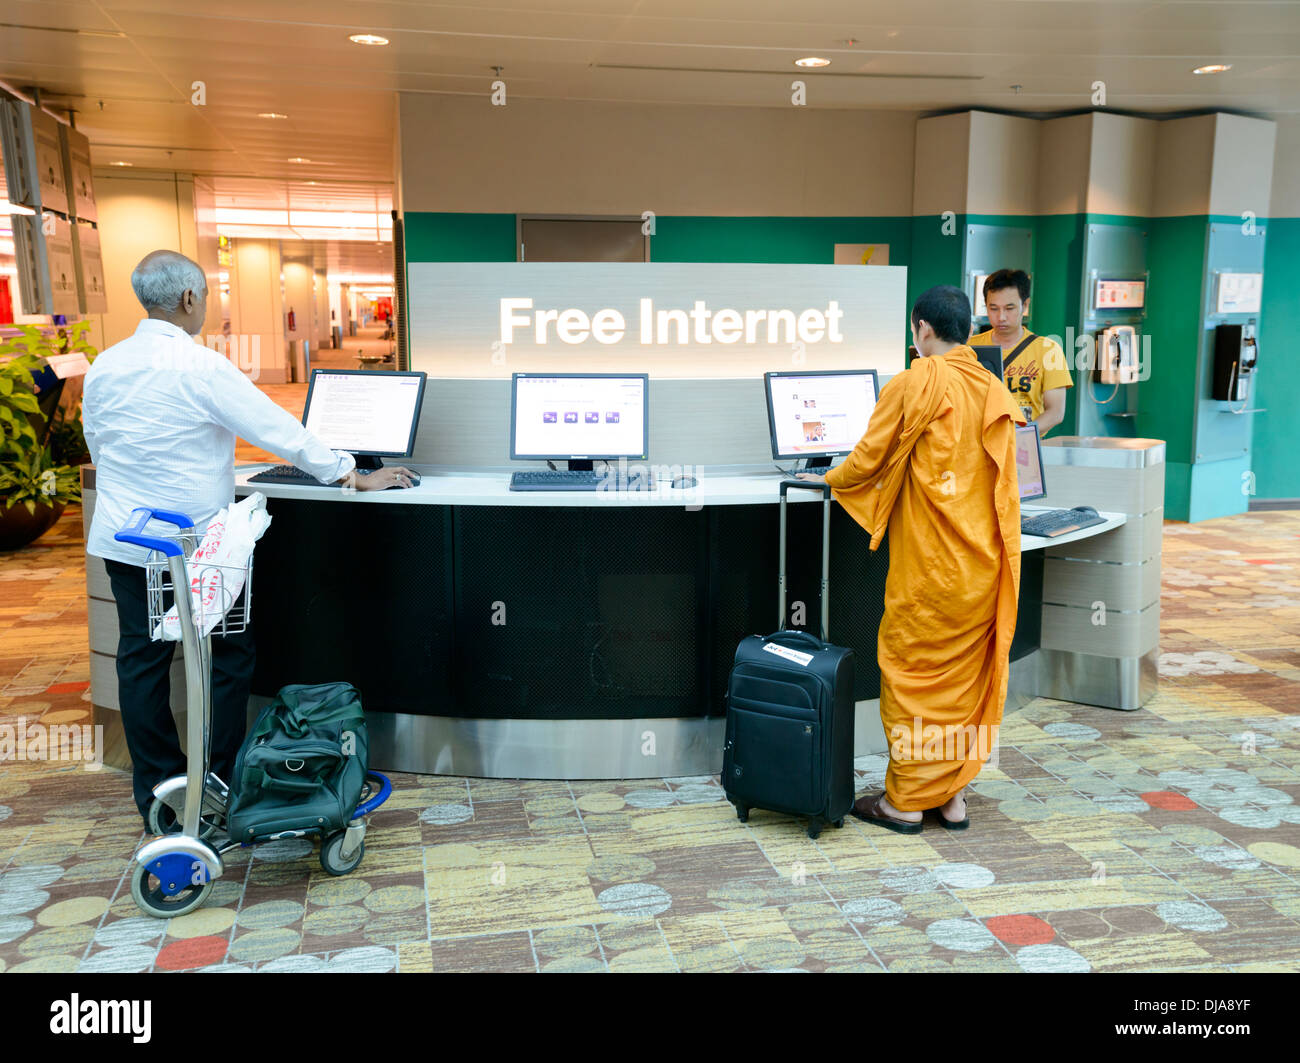 Modern and traditional meet in a multicultural environment: a Buddhist monk and Indian businessman use a free internet service. Stock Photo